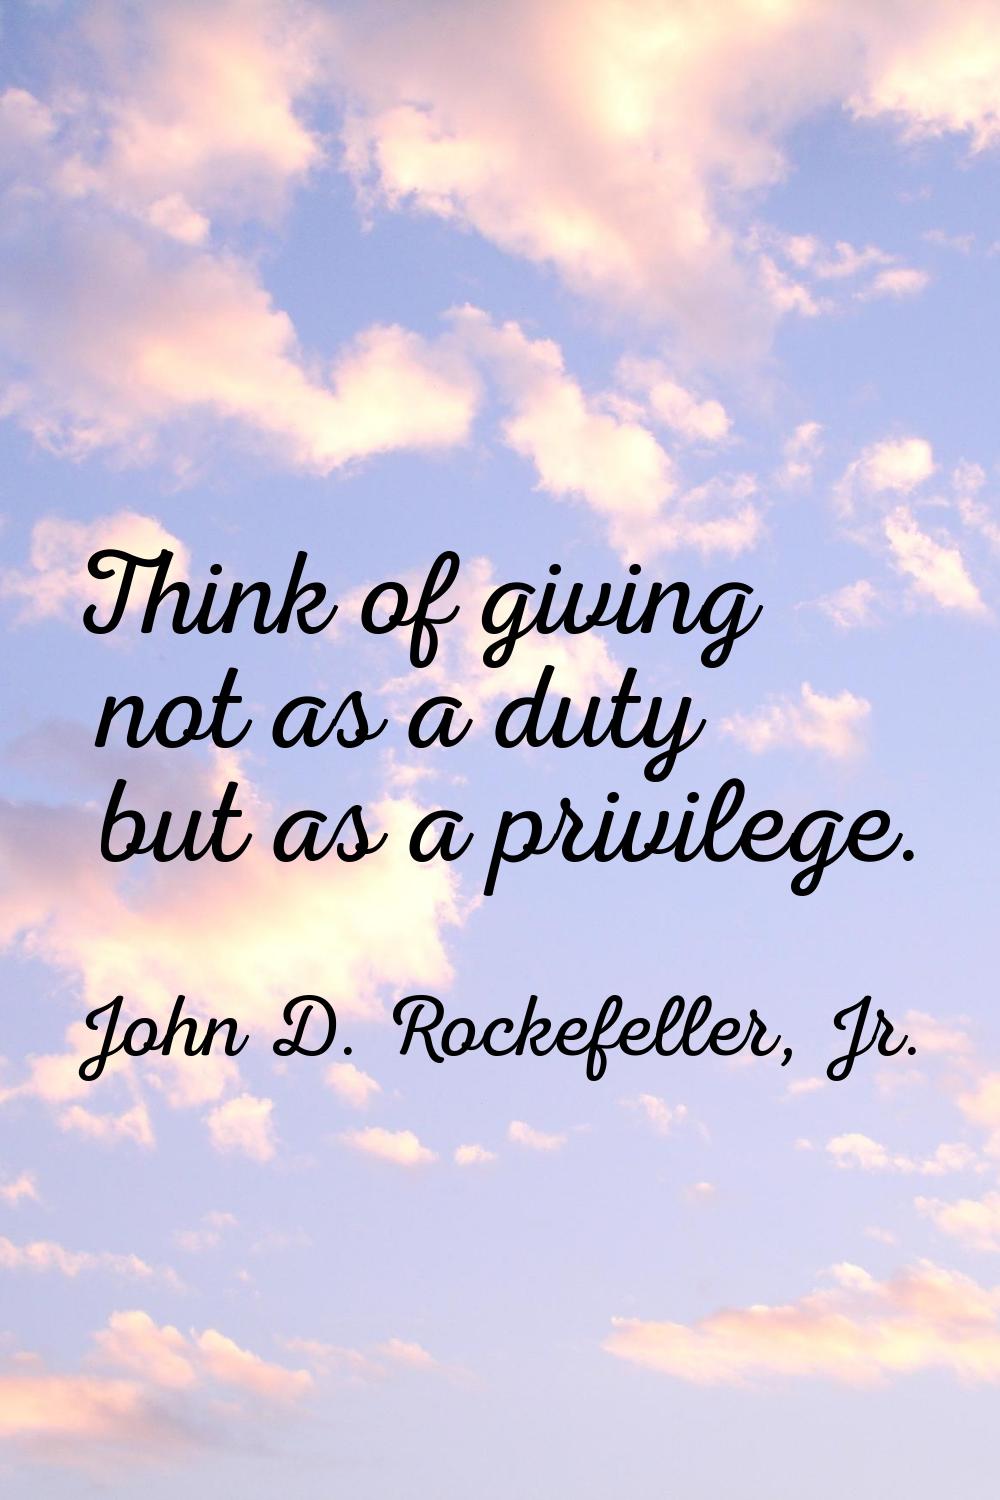 Think of giving not as a duty but as a privilege.